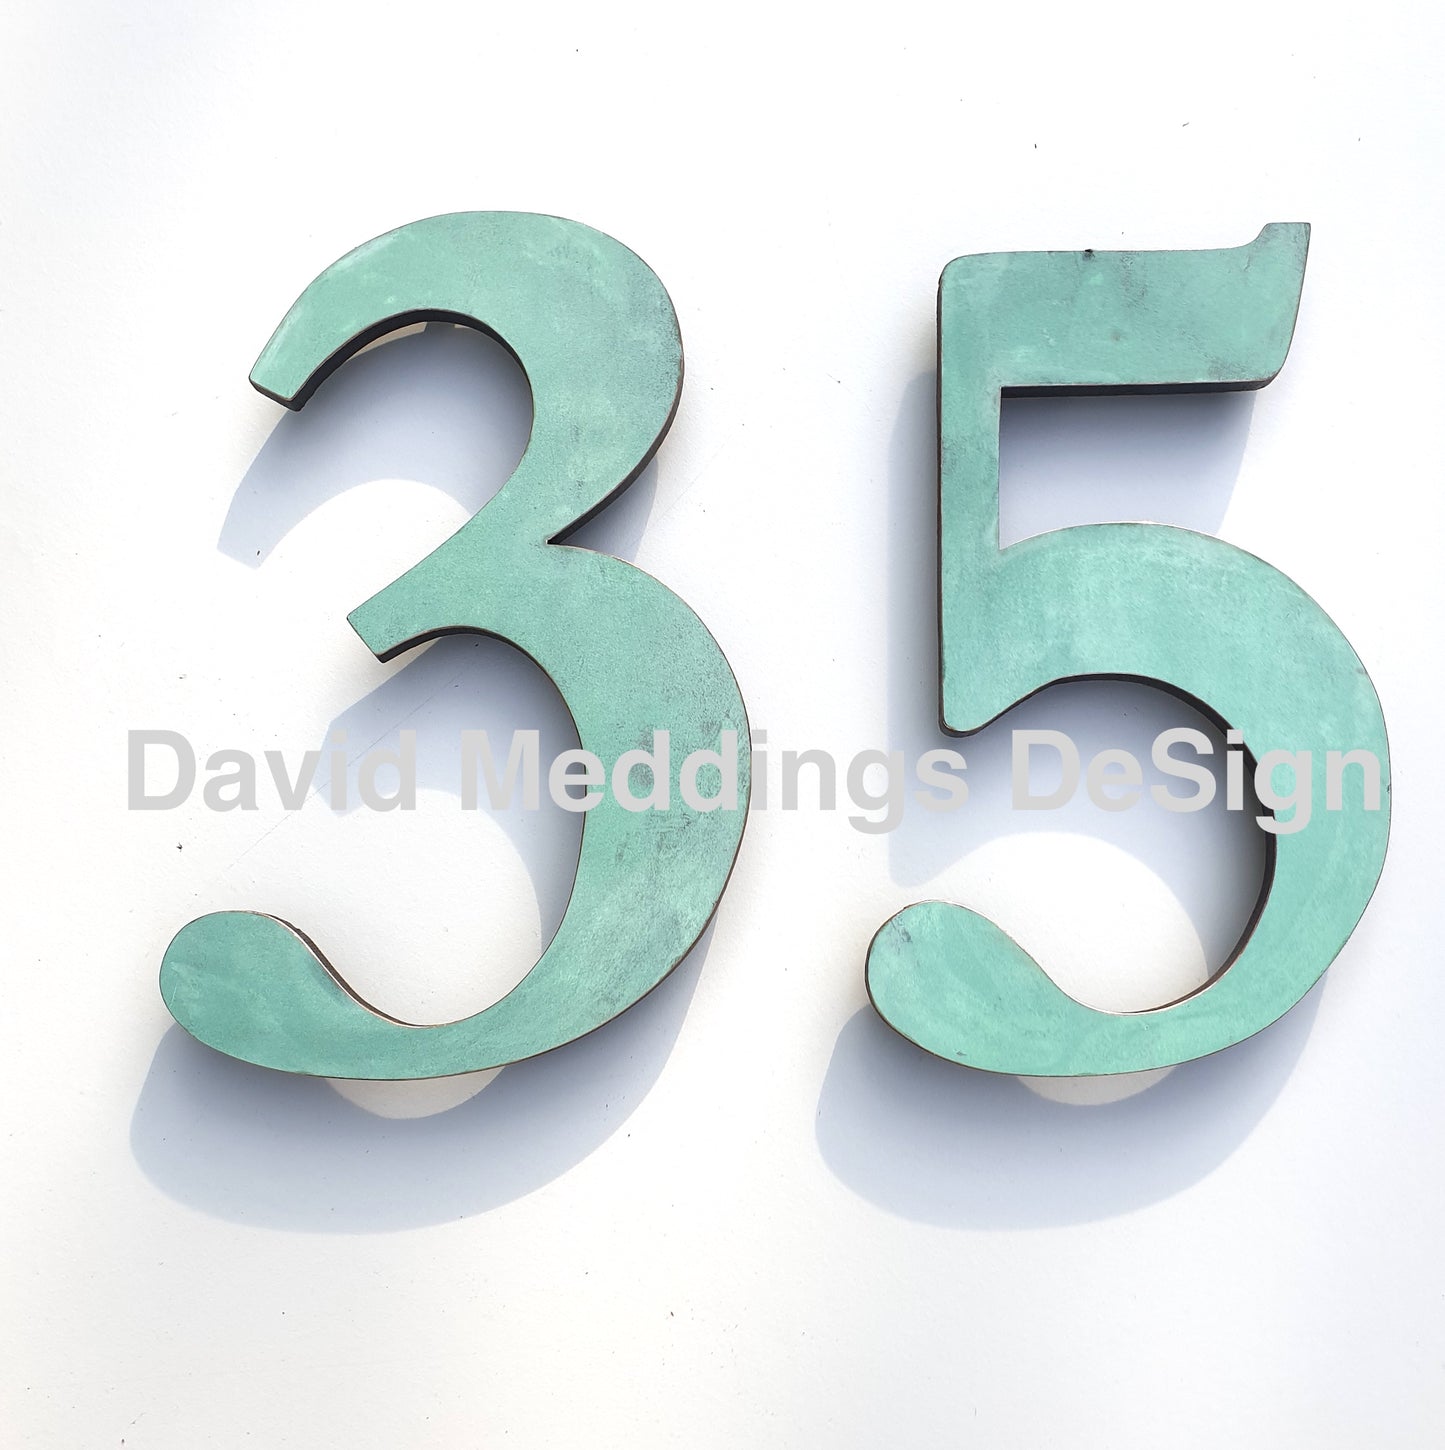 Copper traditional style floating numbers 3"/75mm high polished, hammered, brushed or patinated in Garamond tx